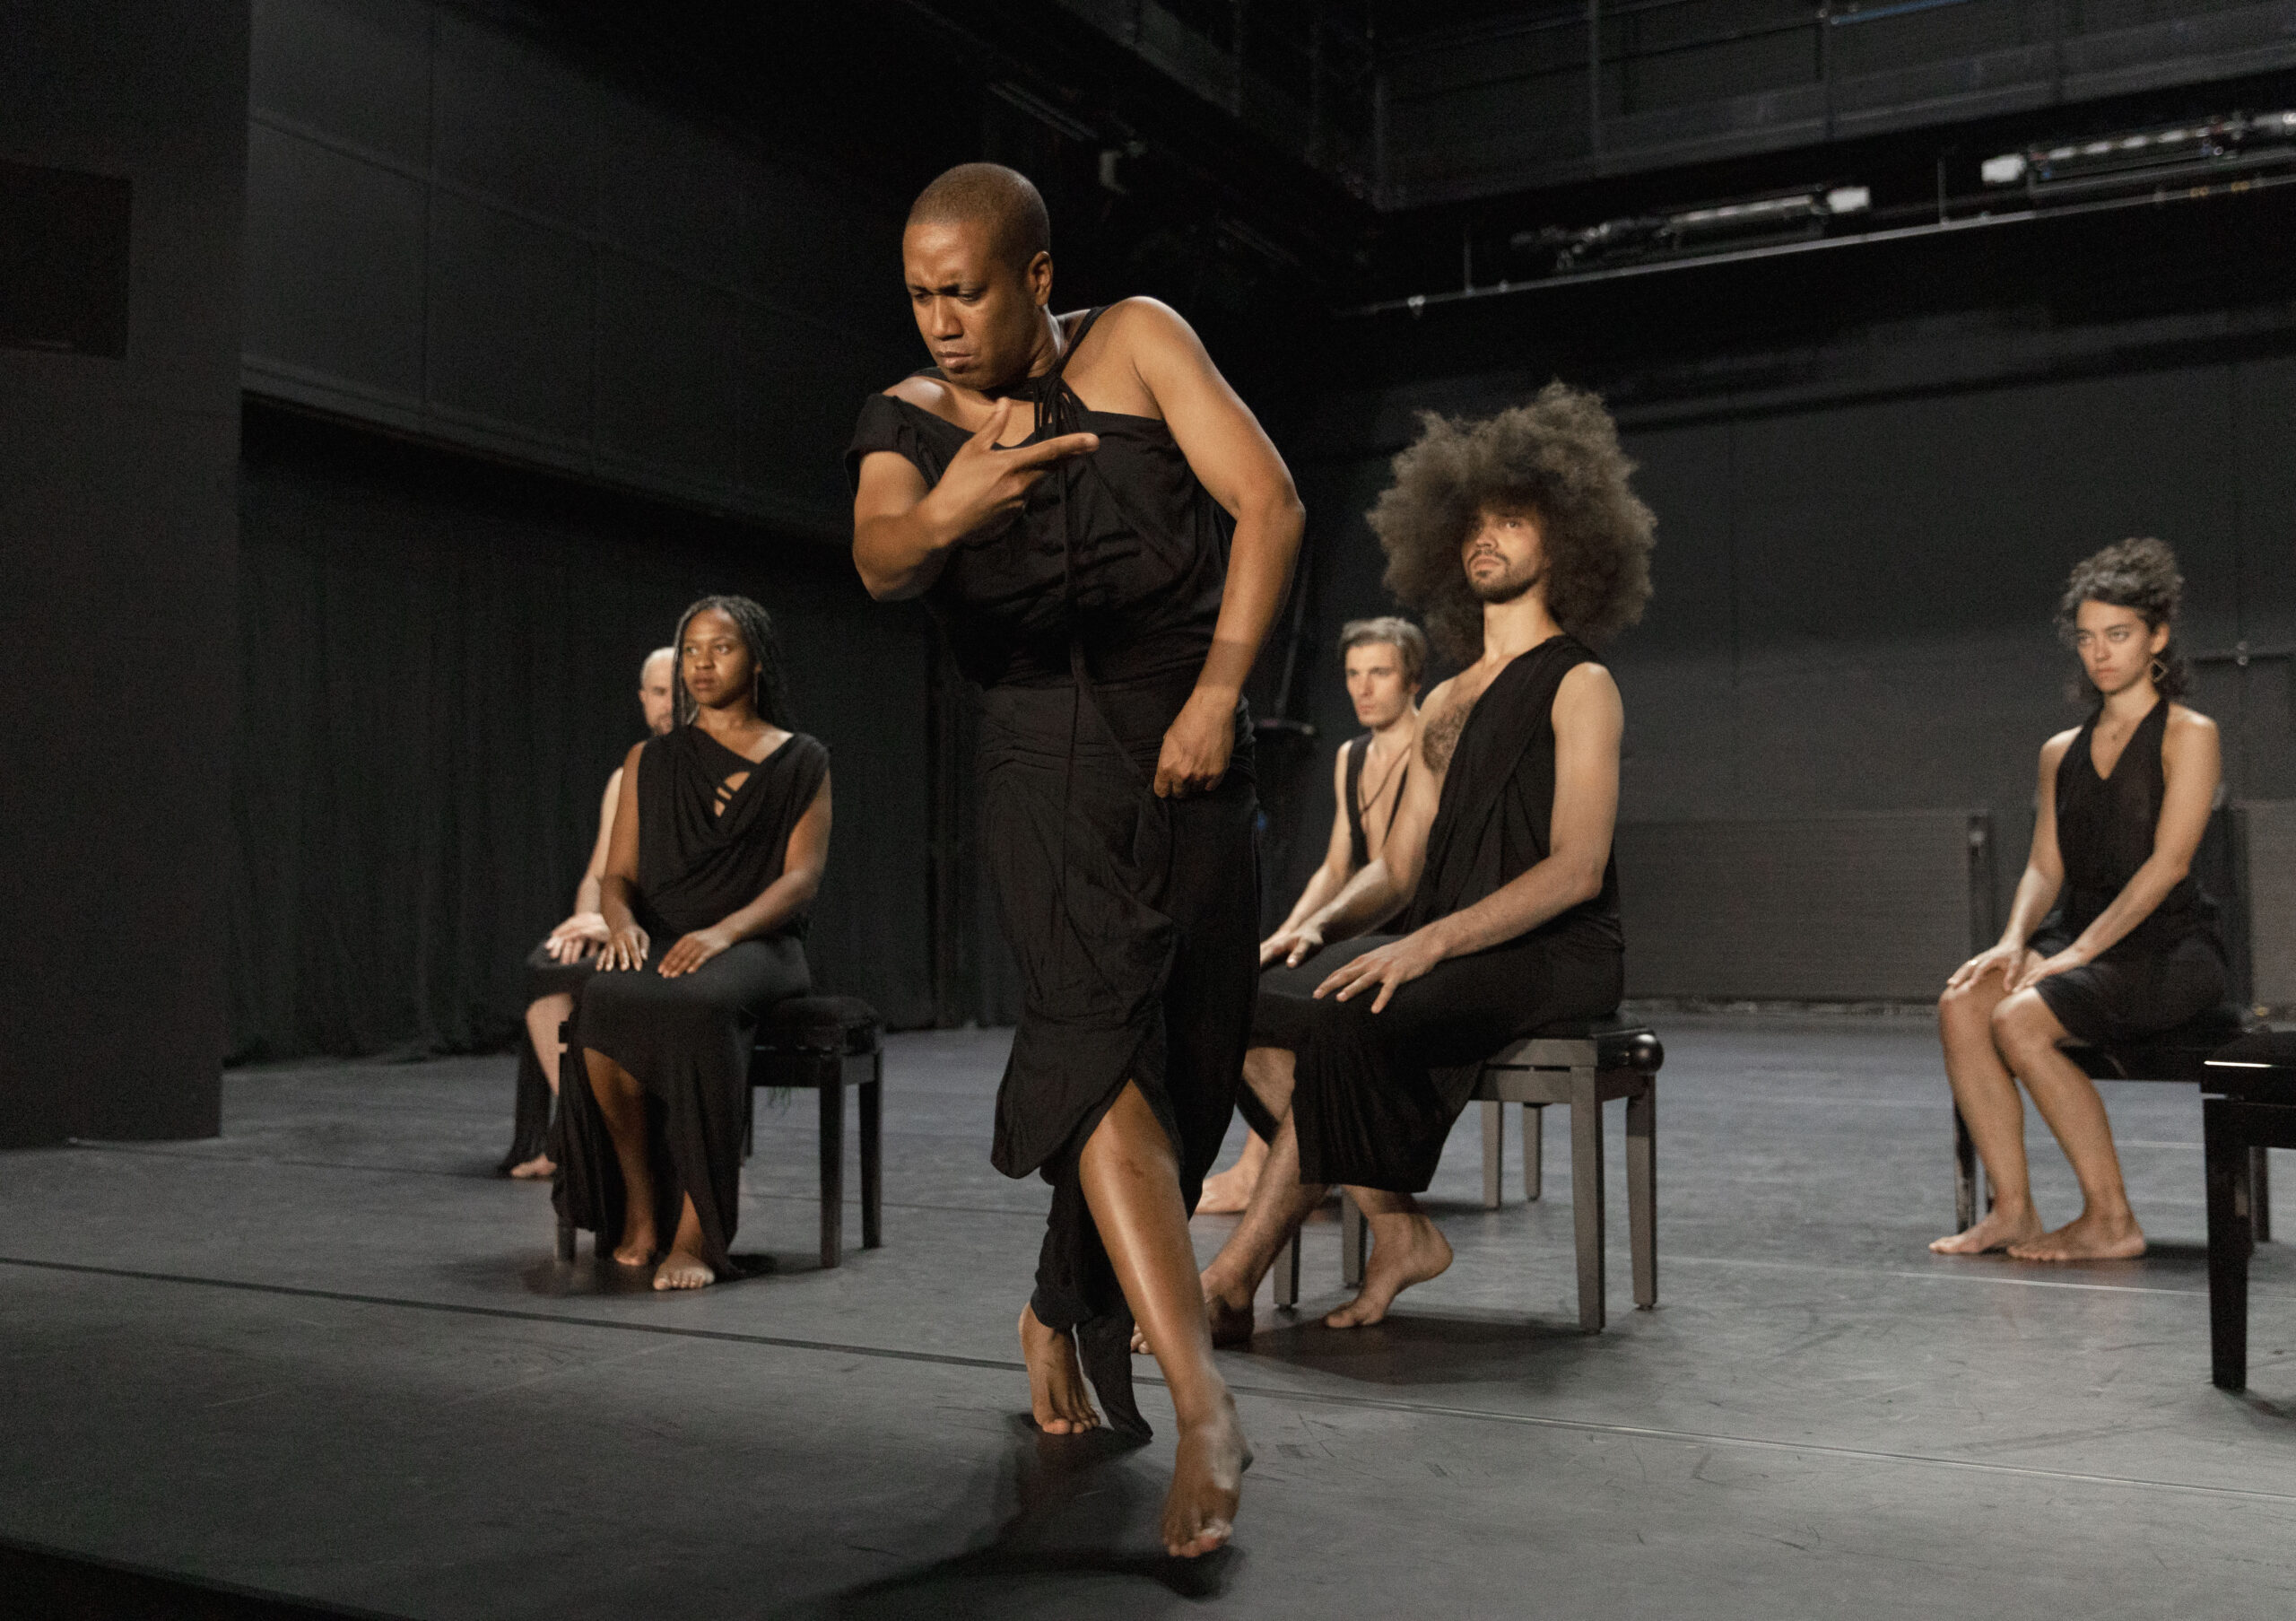 a dancer wearing a black dress performing downstage; a group of other dancers sitting in chairs behind